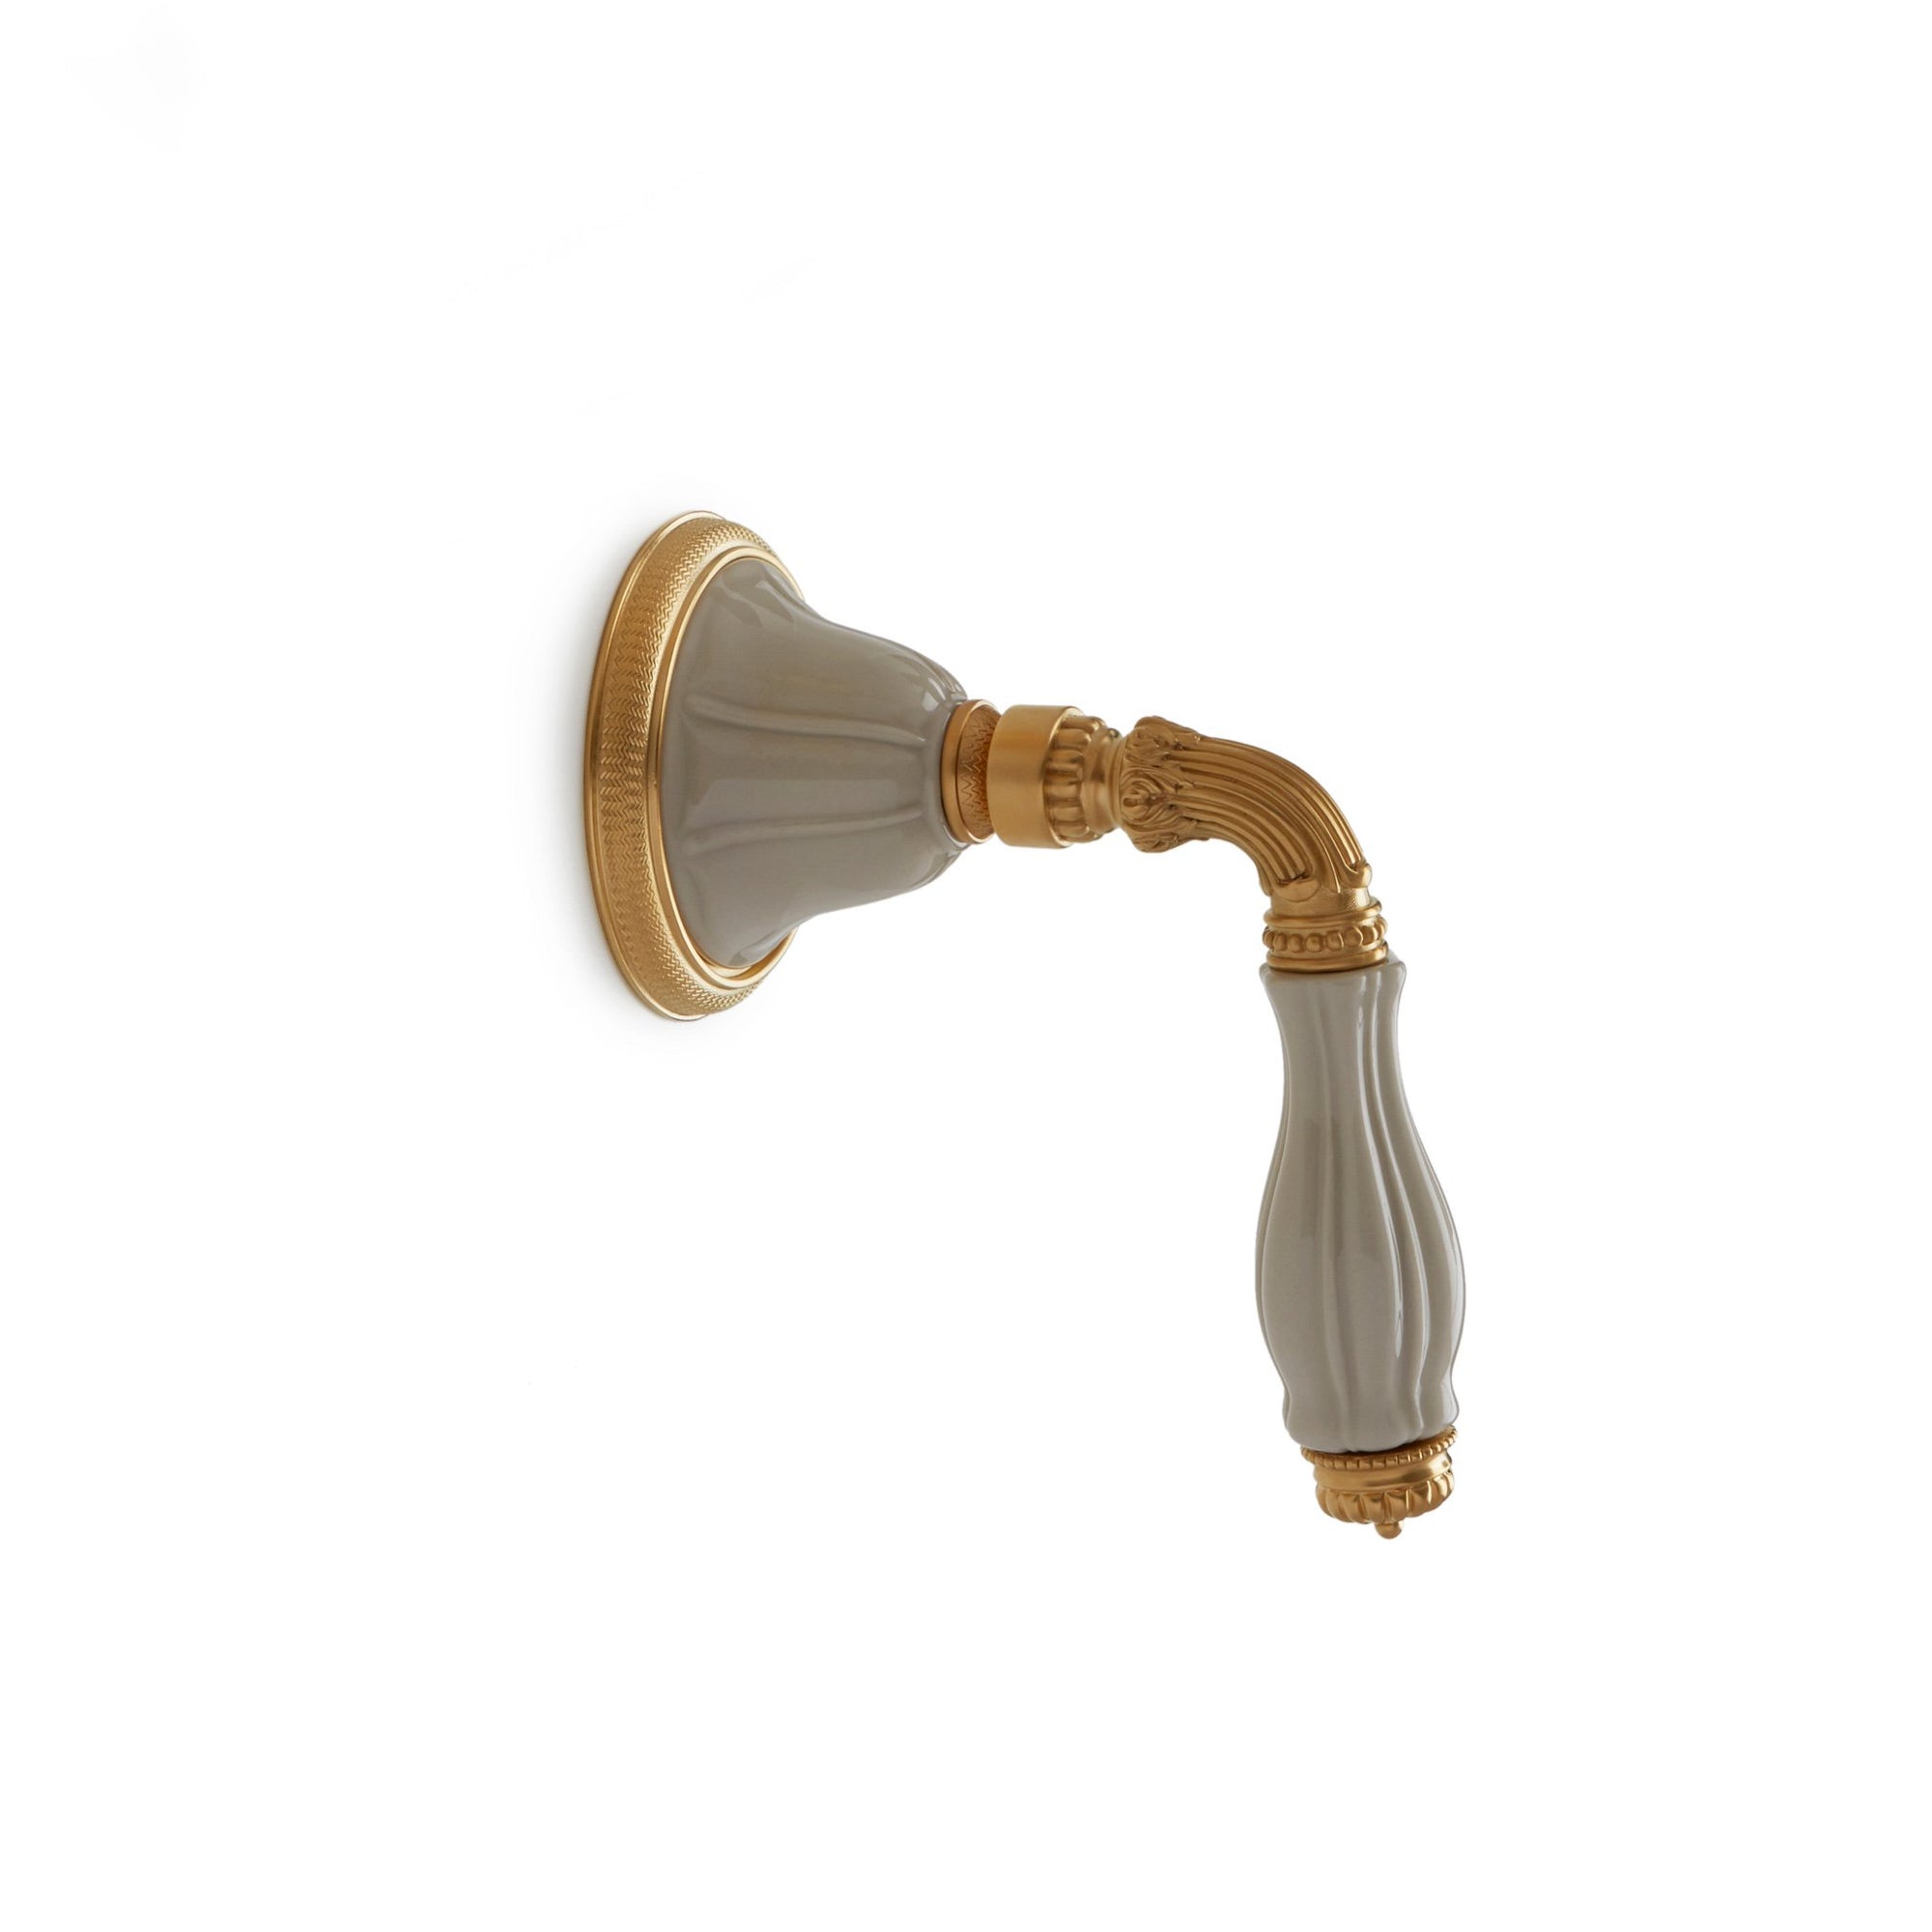 1029LV-ESC-03SD-GP Sherle Wagner International Scalloped Ceramic Fluted Lever Volume Control and Diverter Trim in Gold Plate metal finish with Sand Glaze inserts